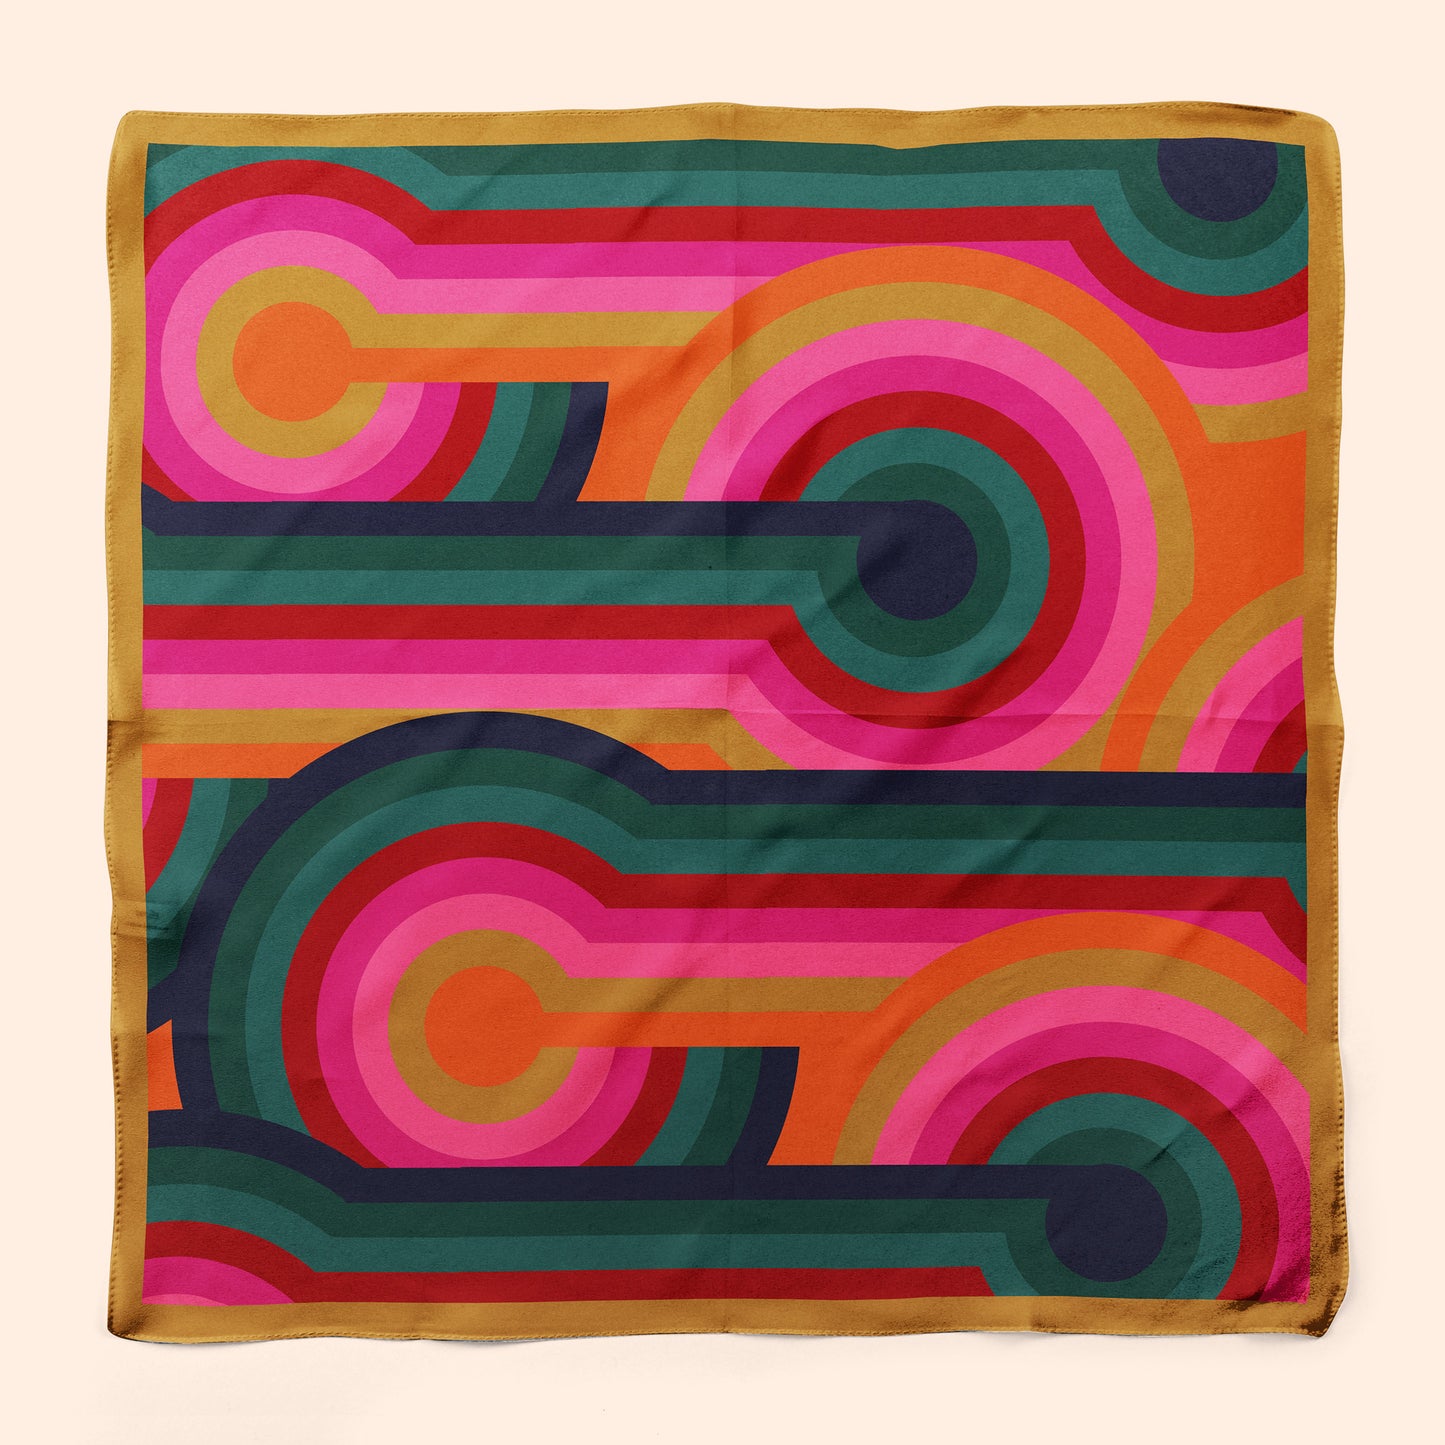 If it's possible for a luxury silk scarf to have a cheeky personality, it's the lolly. In bright and bold colors, this square silk scarf stands out in a crowd. Great worn as a hair wrap or tied to your purse